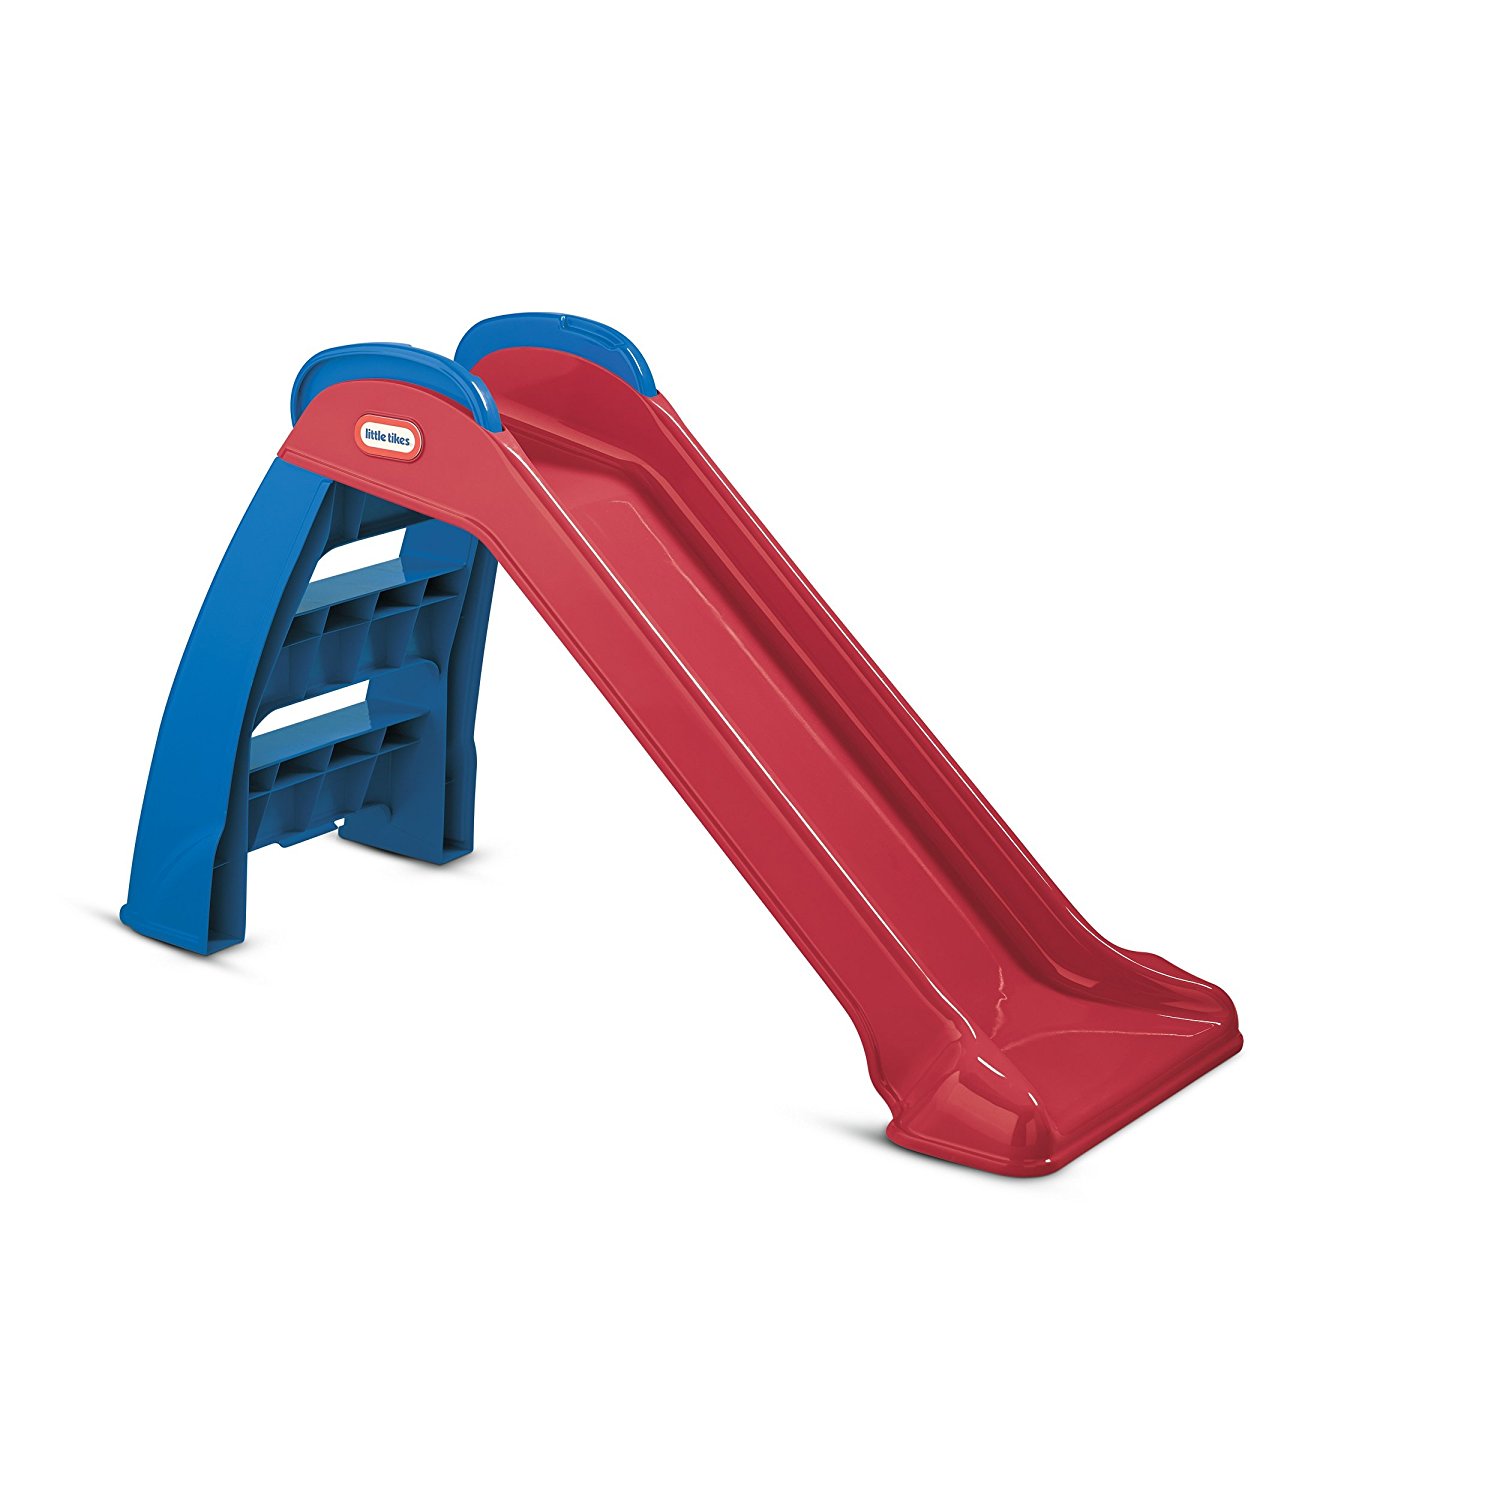 Amazon.com: Little Tikes First Slide, Red/Blue: Toys & Games